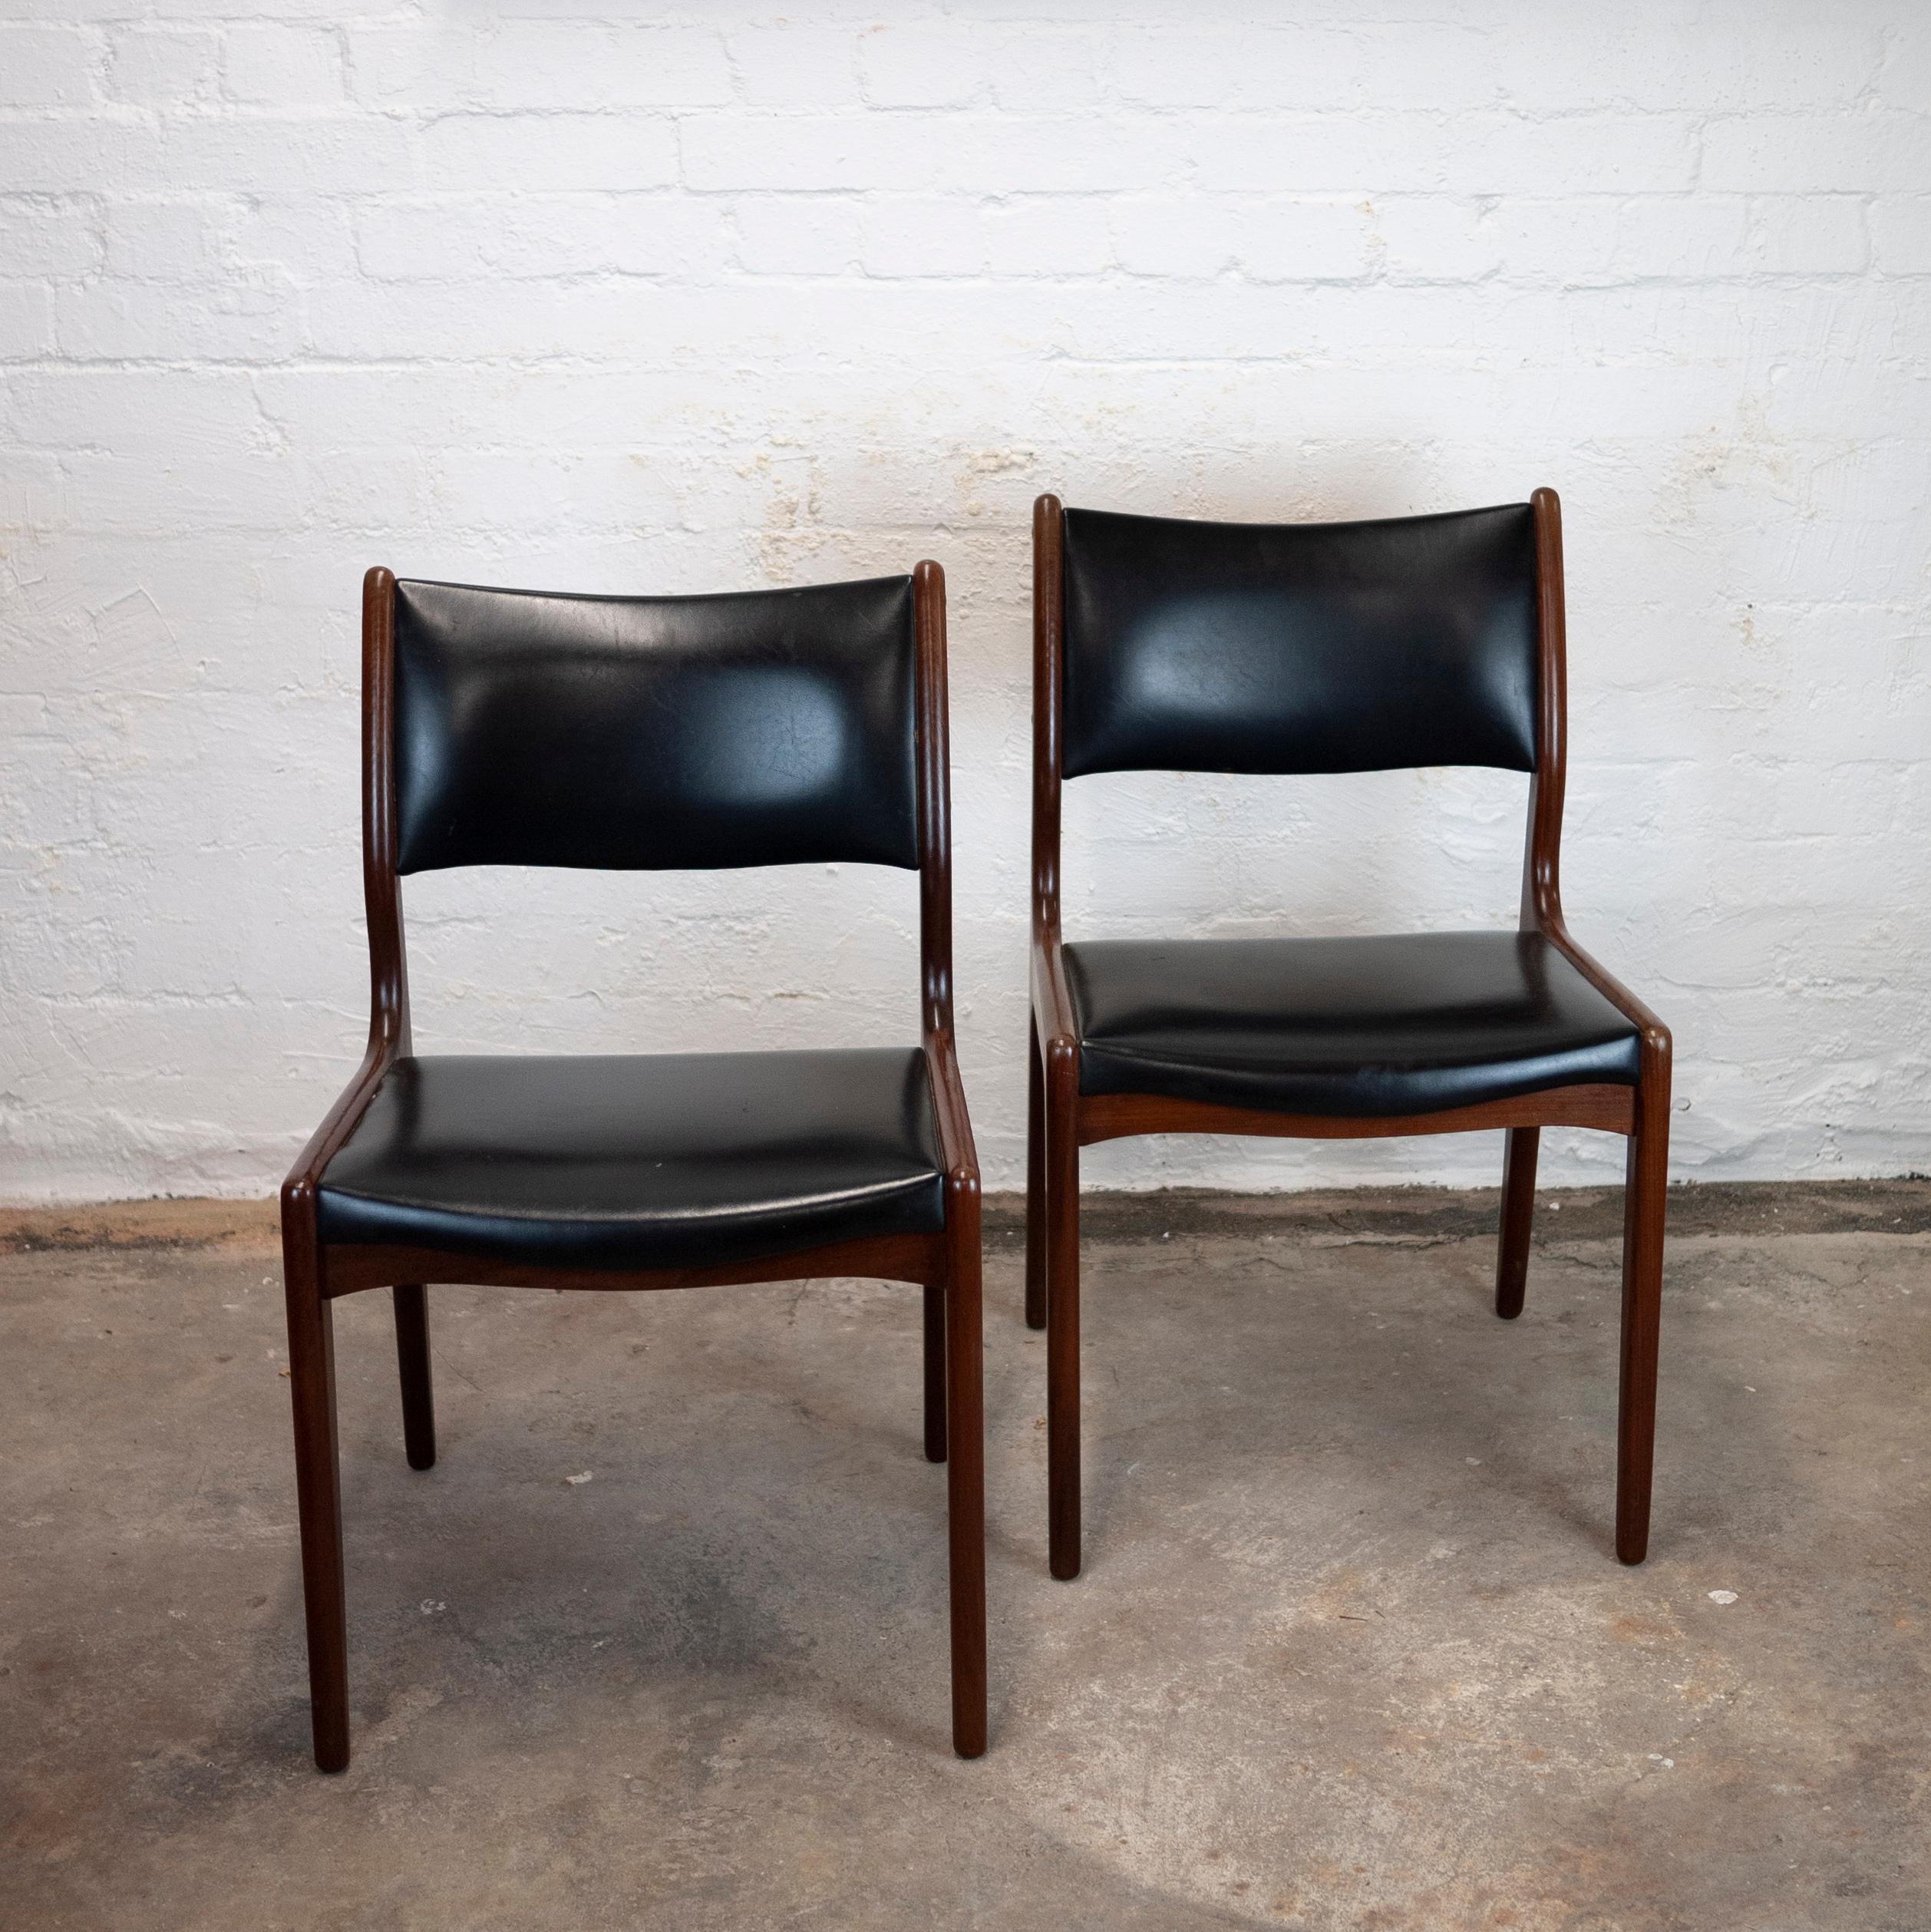 Faux Leather Dining Chairs in Teak and Black Vinyl by Johannes Andersen for Uldum Møbelfabrik